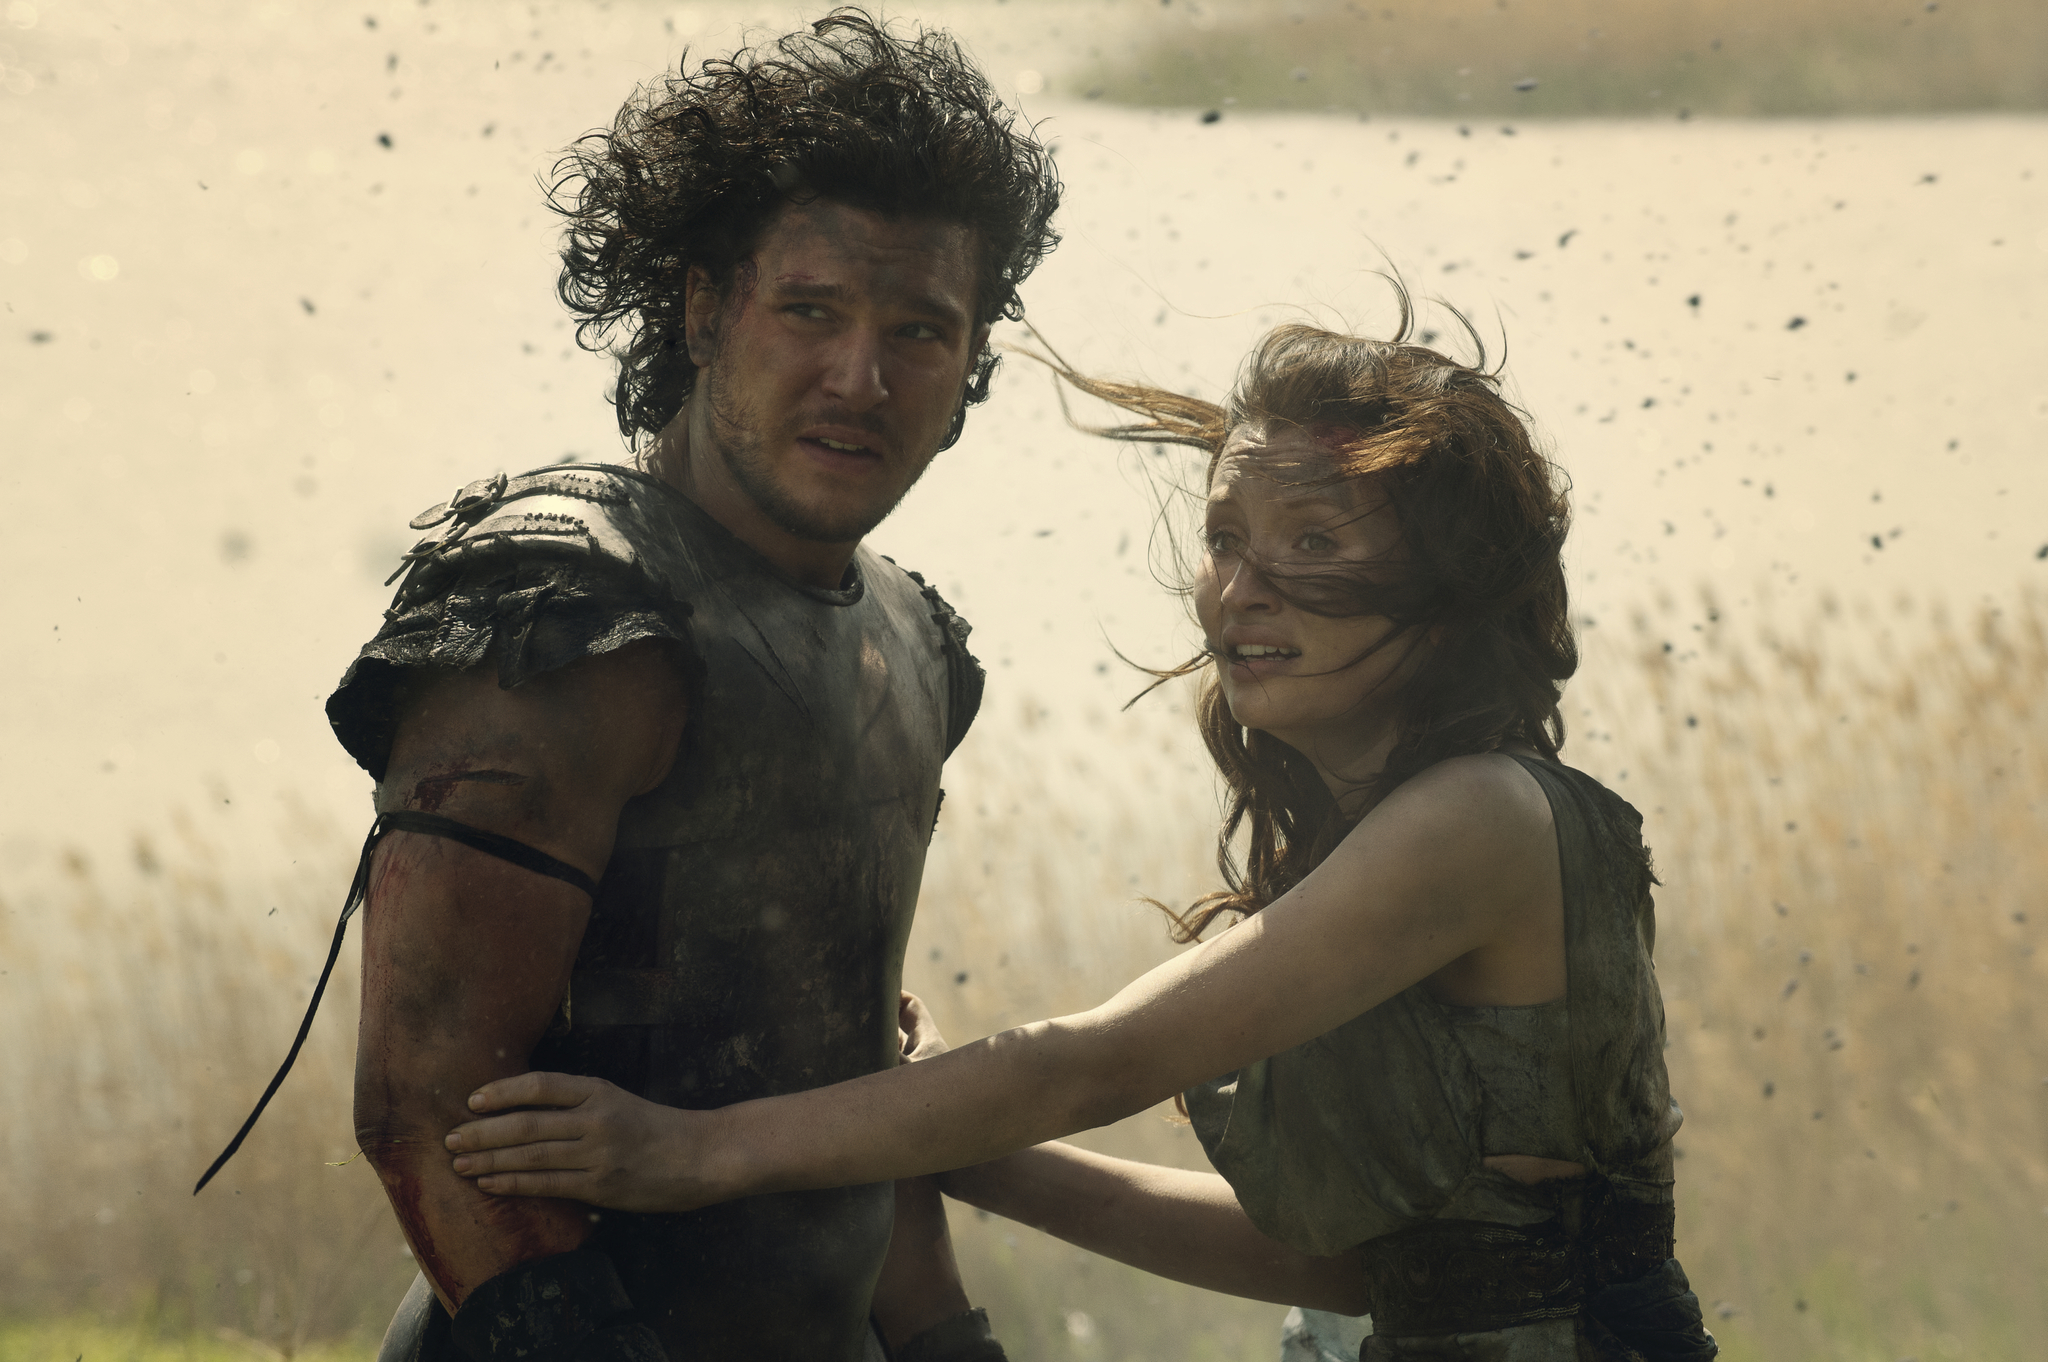 Still of Emily Browning and Kit Harington in Pompeja (2014)